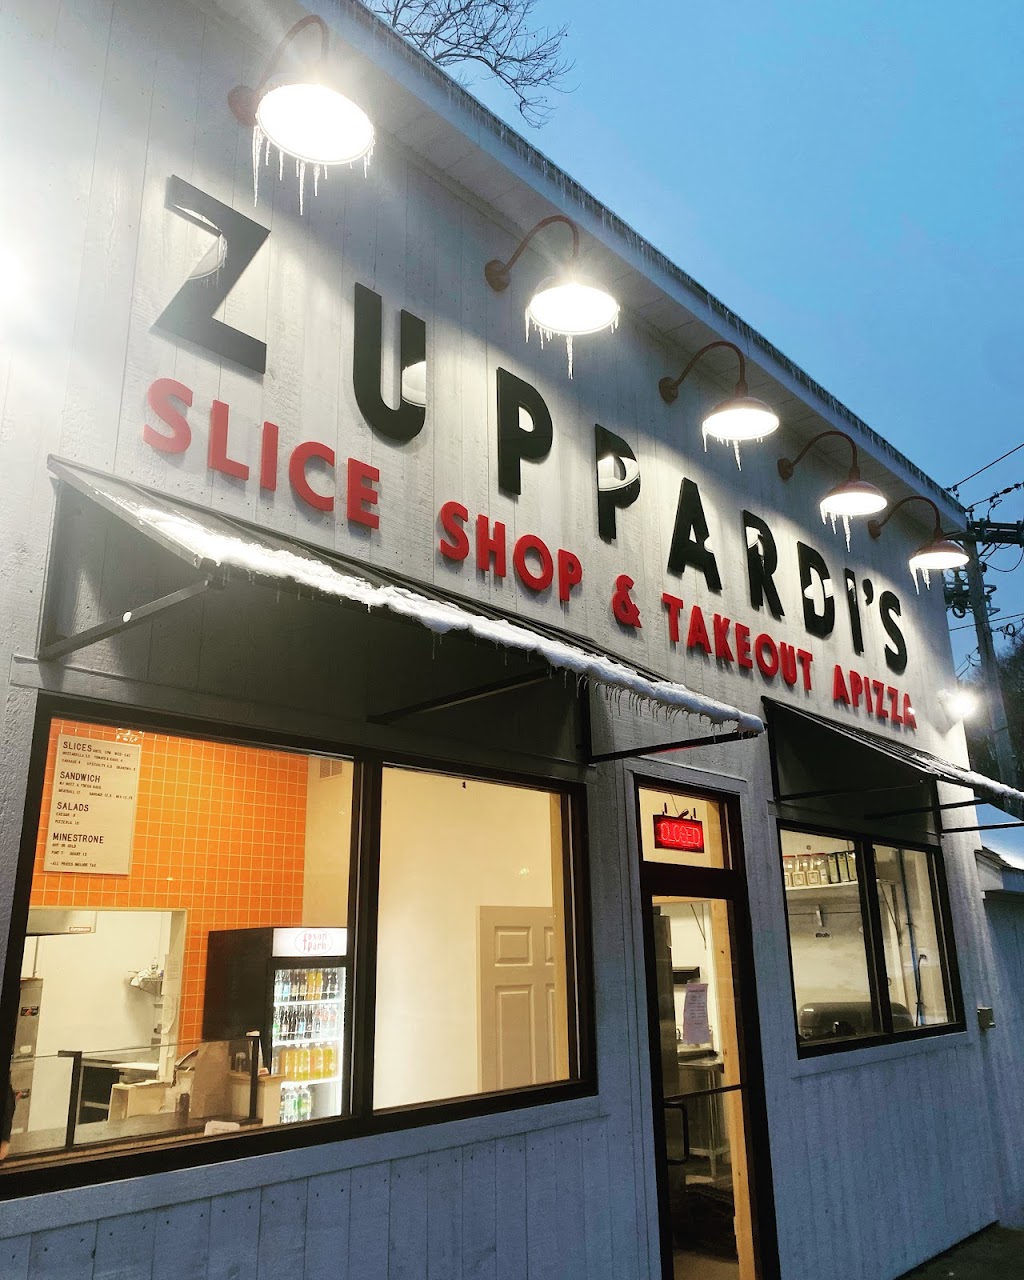 Zuppardis - Slice Shop & Takeout Apizza | 58 Beaver St, Ansonia, CT 06401 | Phone: (203) 751-9006